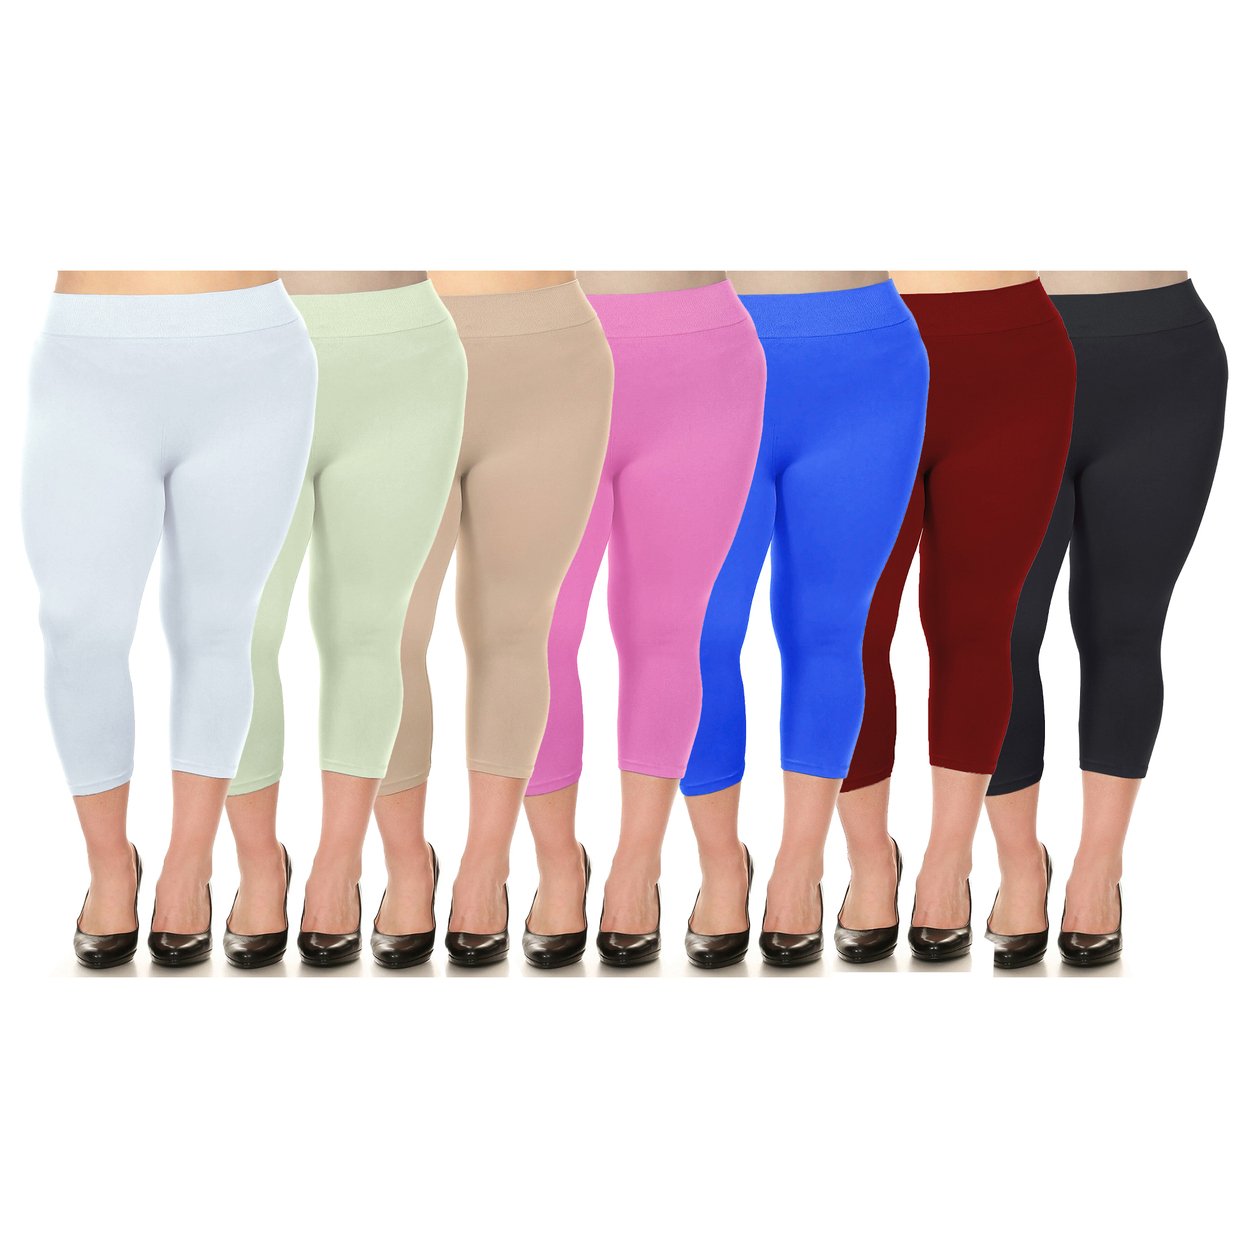 Women's Ultra-Soft High Waisted Smooth Stretch Active Yoga Capri Leggings Plus Size Available - Red, 1x